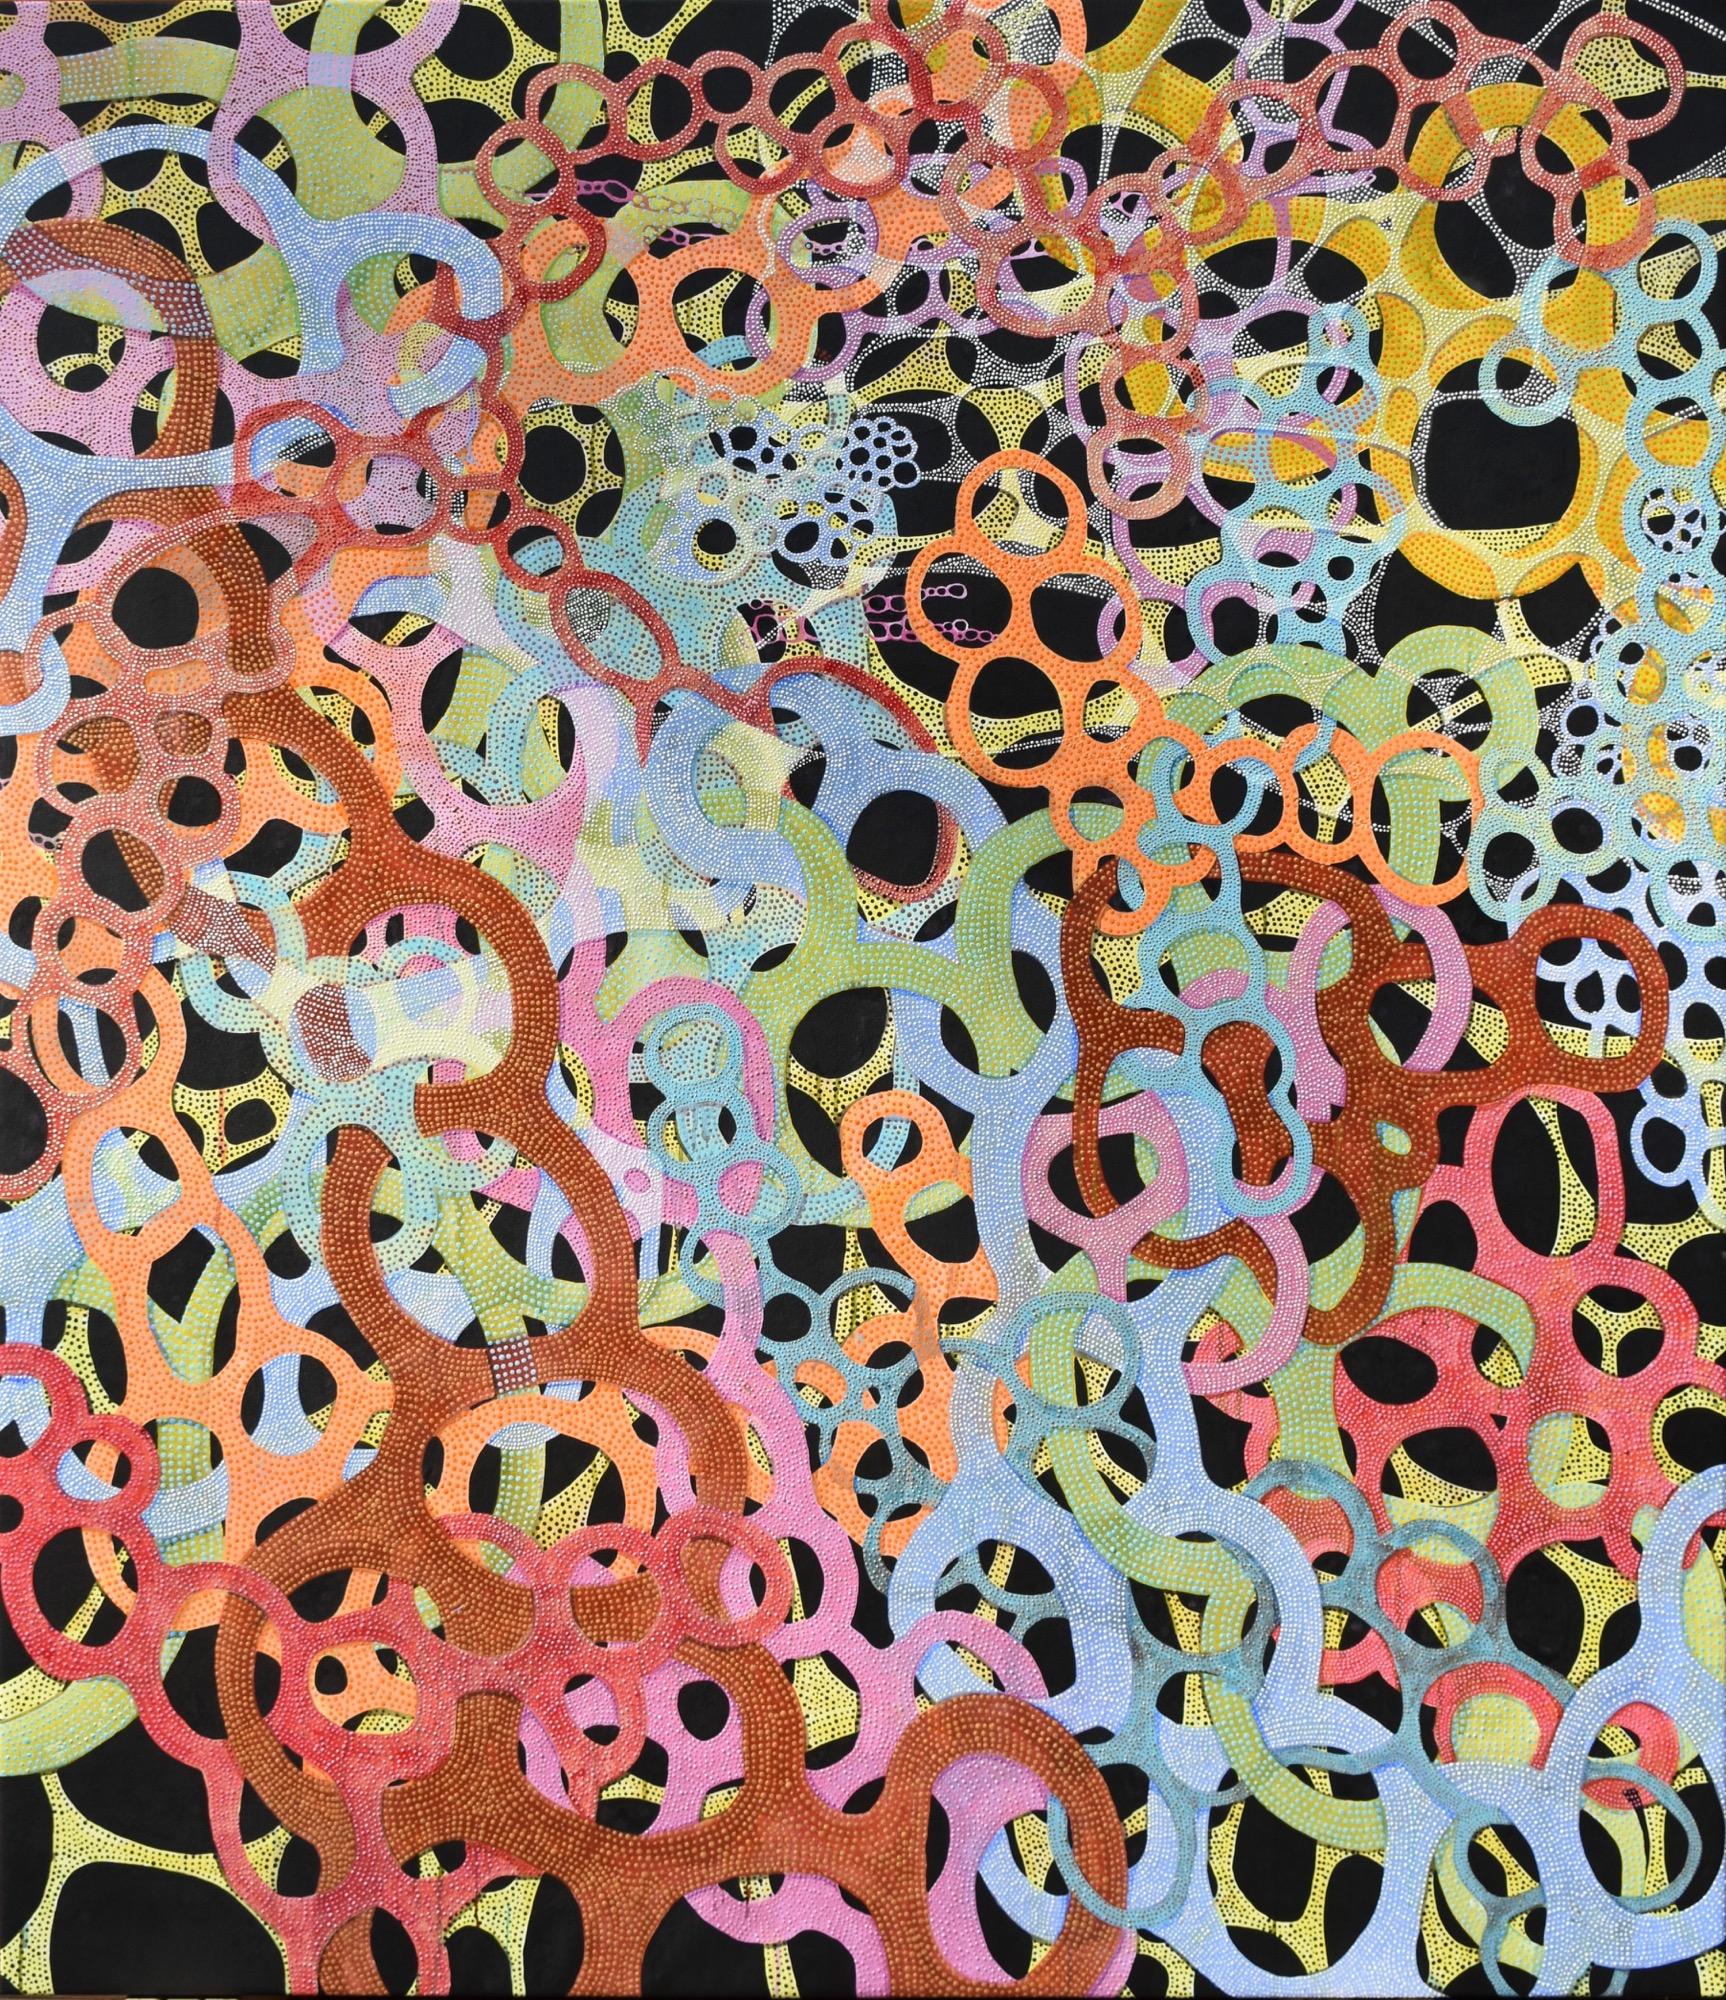 "Shimmer 1", abstract, brightly colored, black, metallic, dots, acrylic painting - Painting by Denise Driscoll